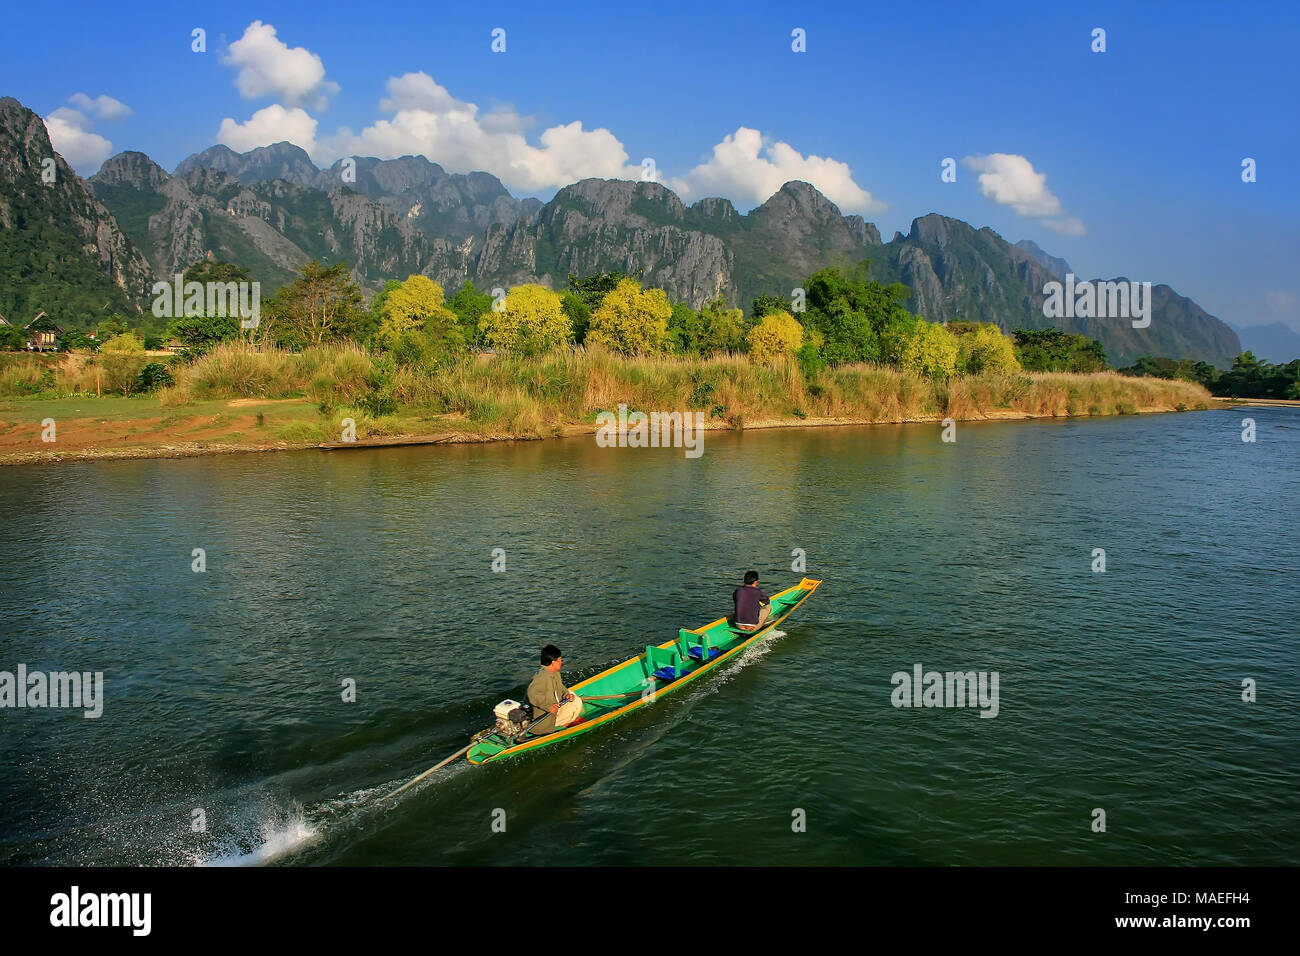 Motorboat moving on Nam Song River in Vang Vieng, Laos. Vang Vieng is a popular destination for adventure tourism in a limestone karst landscape. Stock Photo